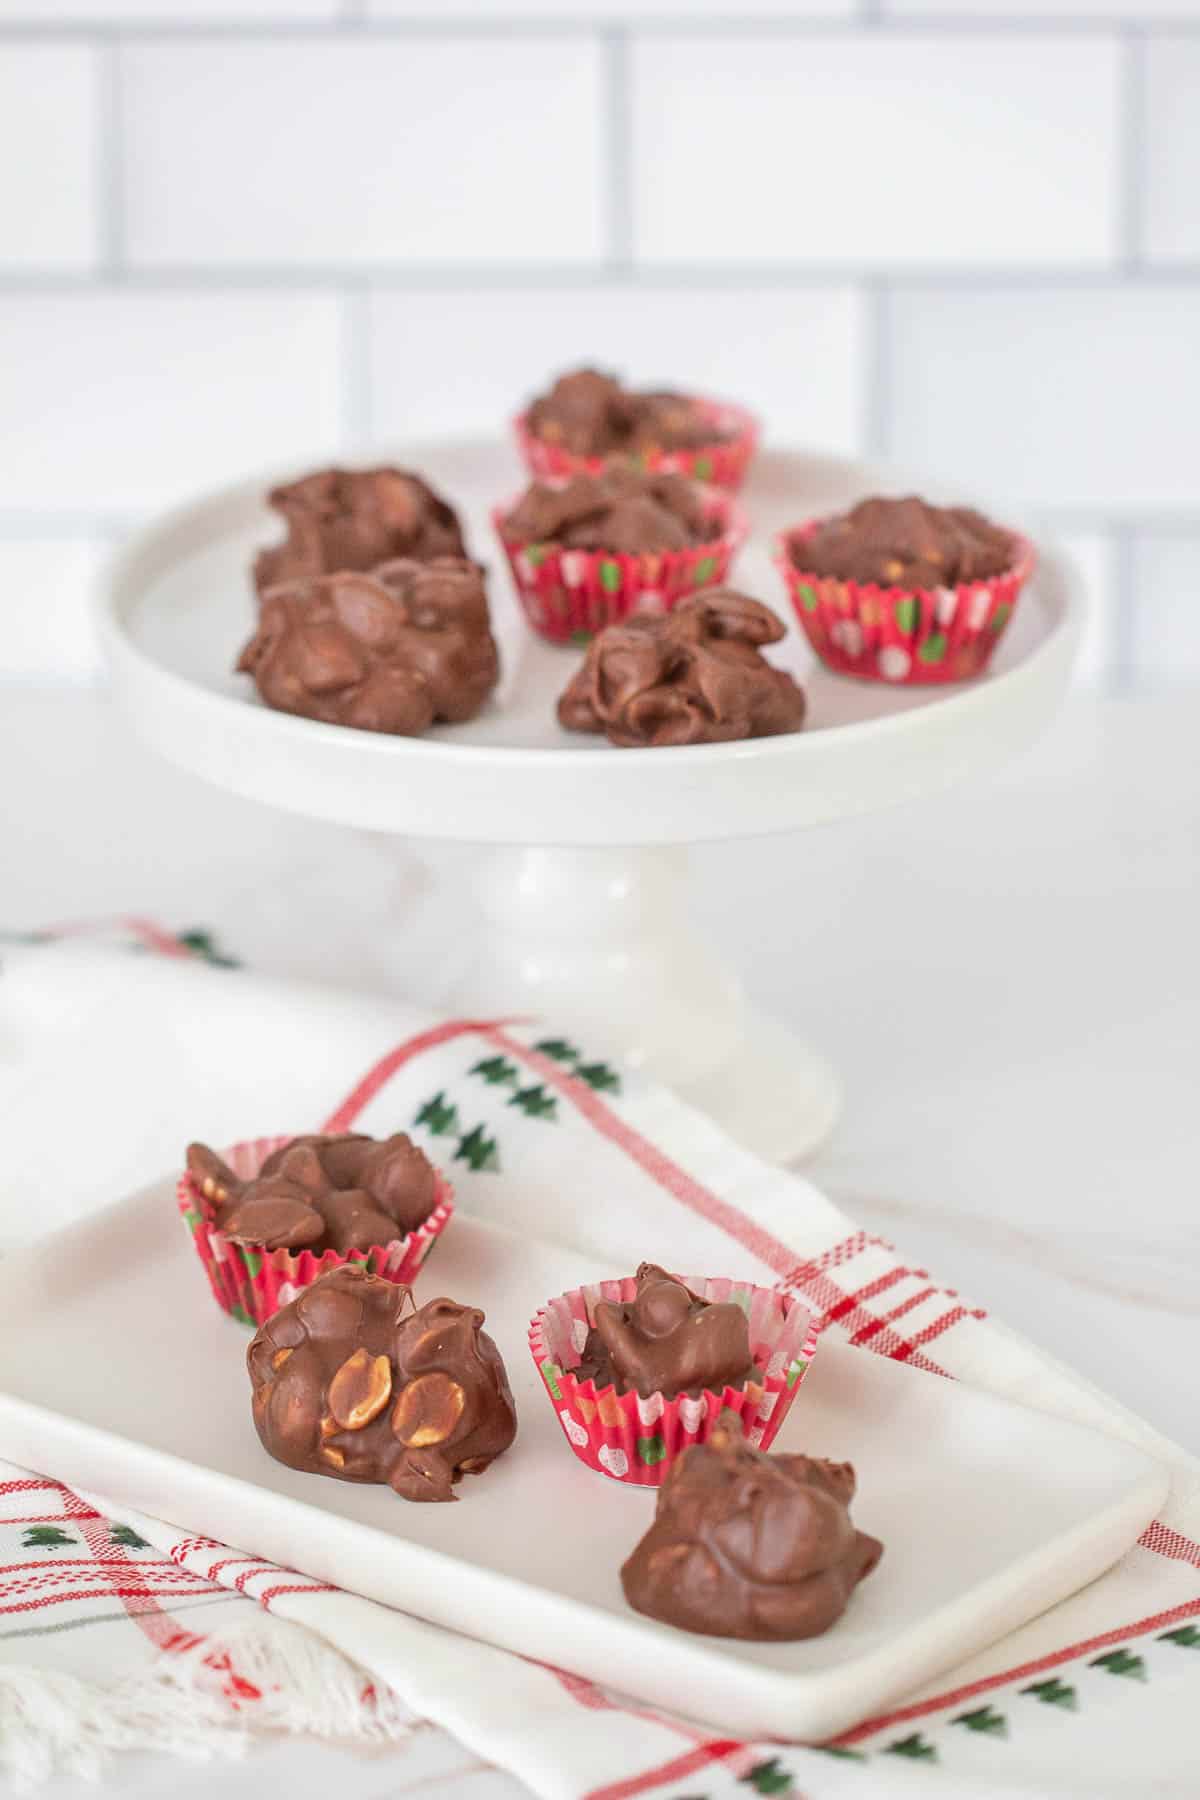 peanut clusters on a tray and cake stand with christmas towel